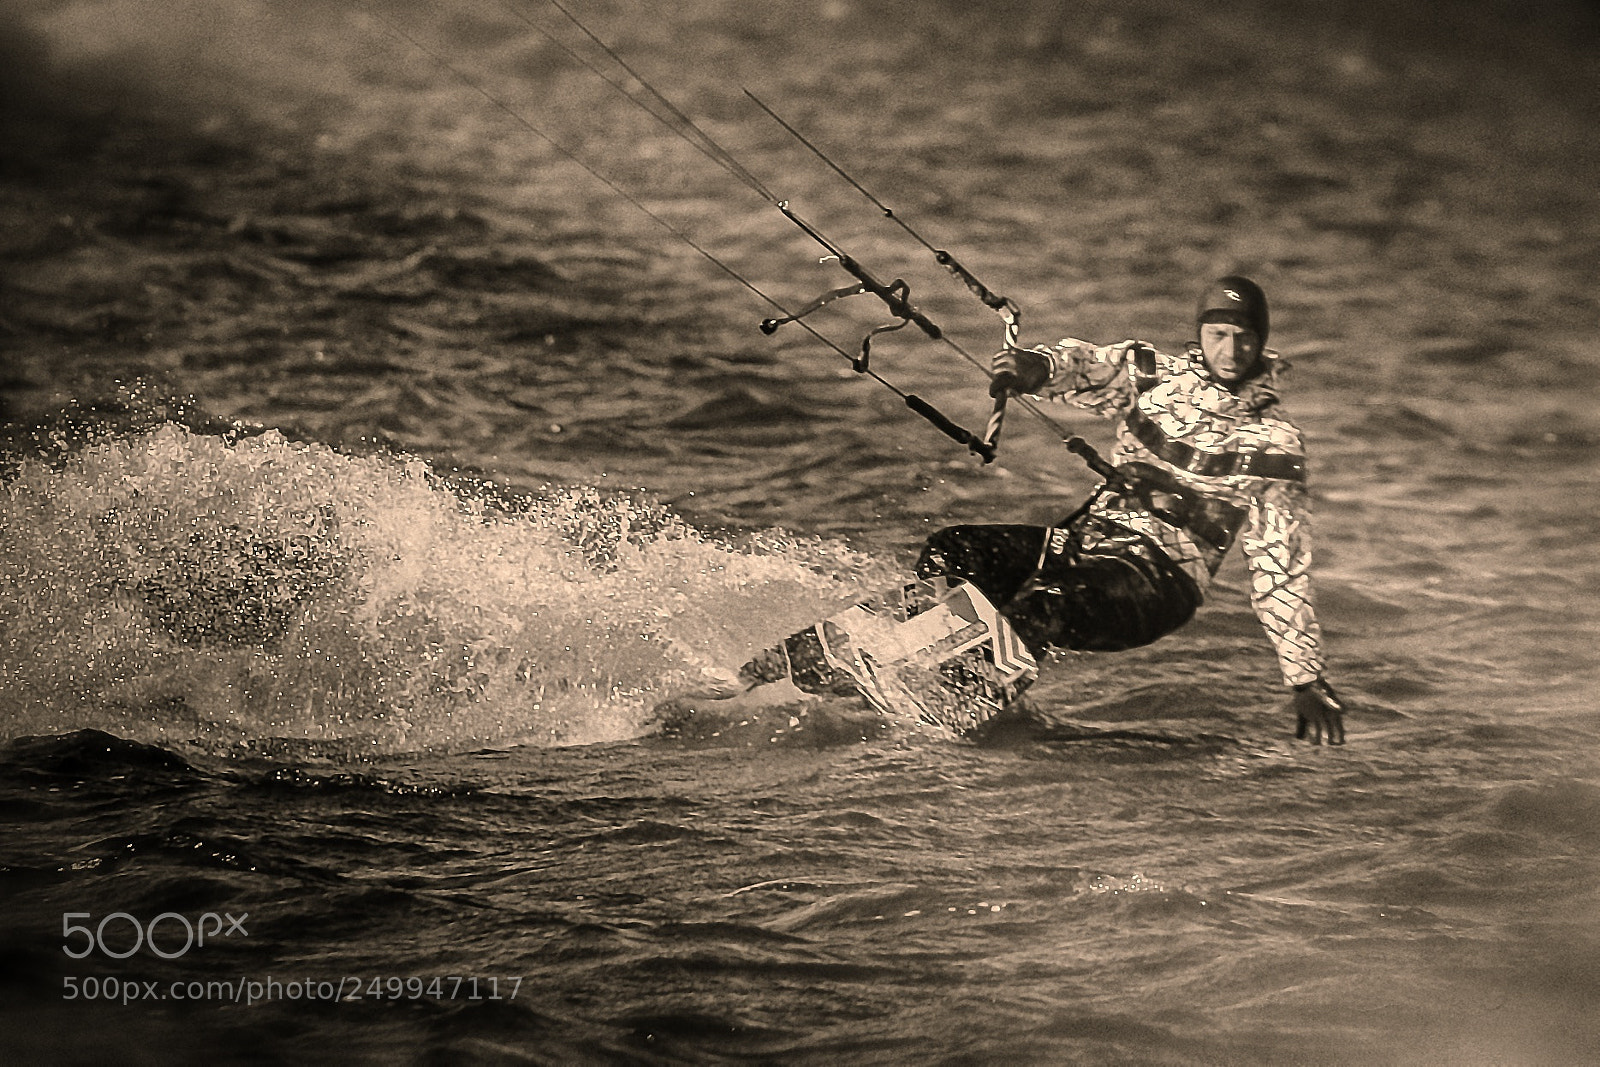 Sony a99 II sample photo. Kite-surfing in winter bw photography